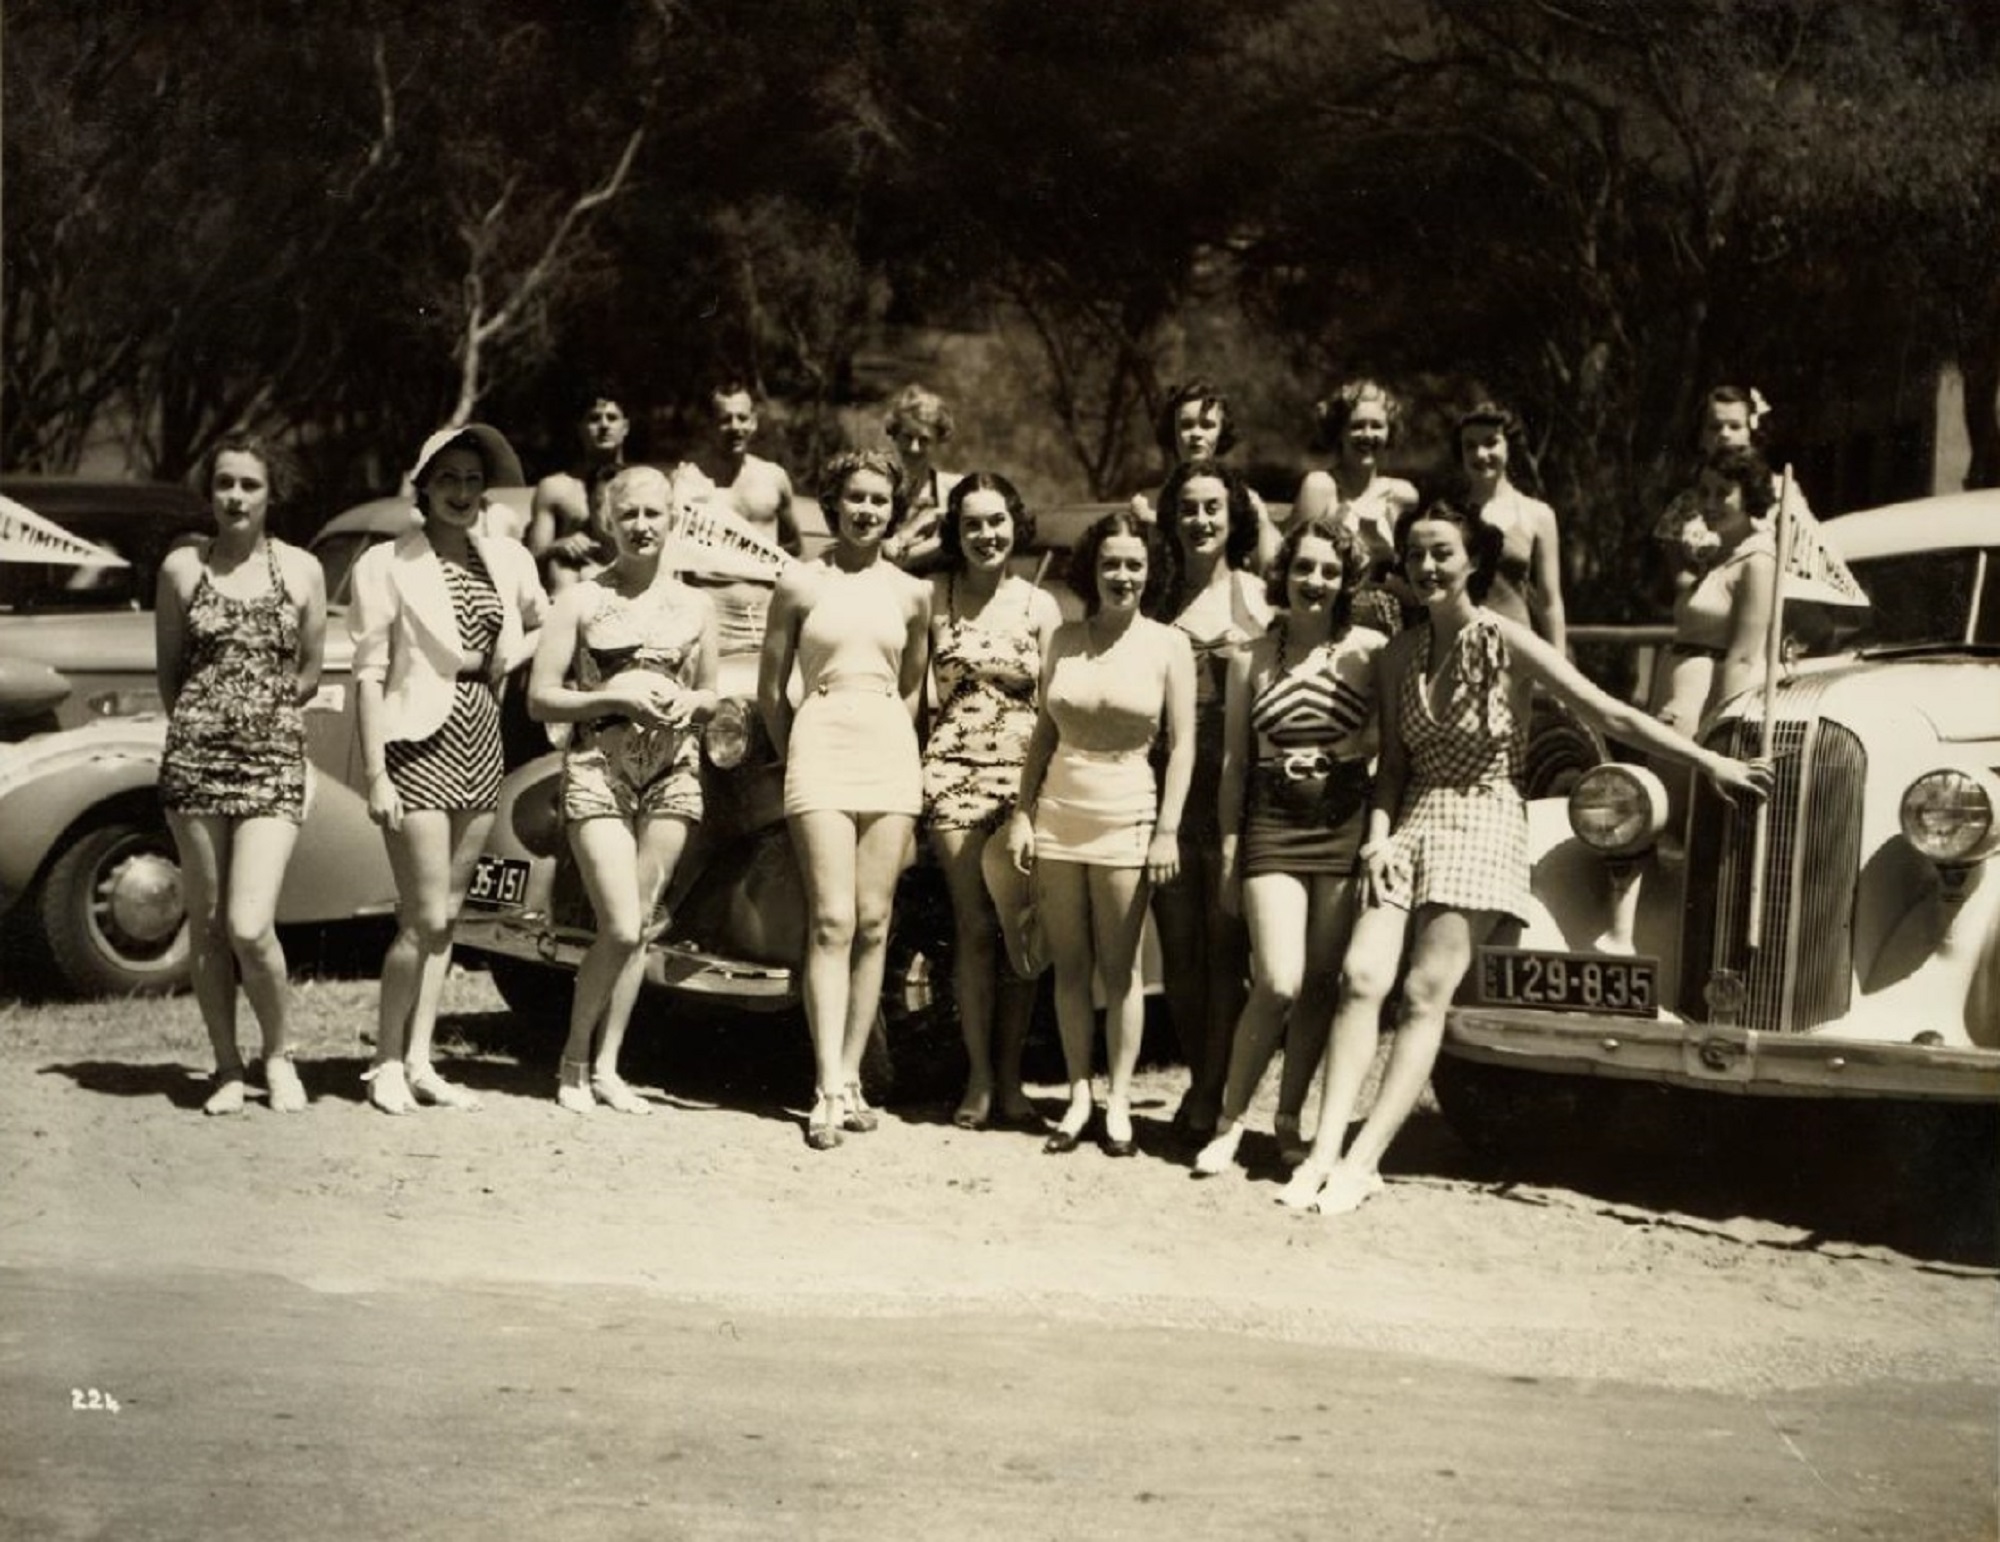 Men and woman in swimsuits lined up against cars for a photo.